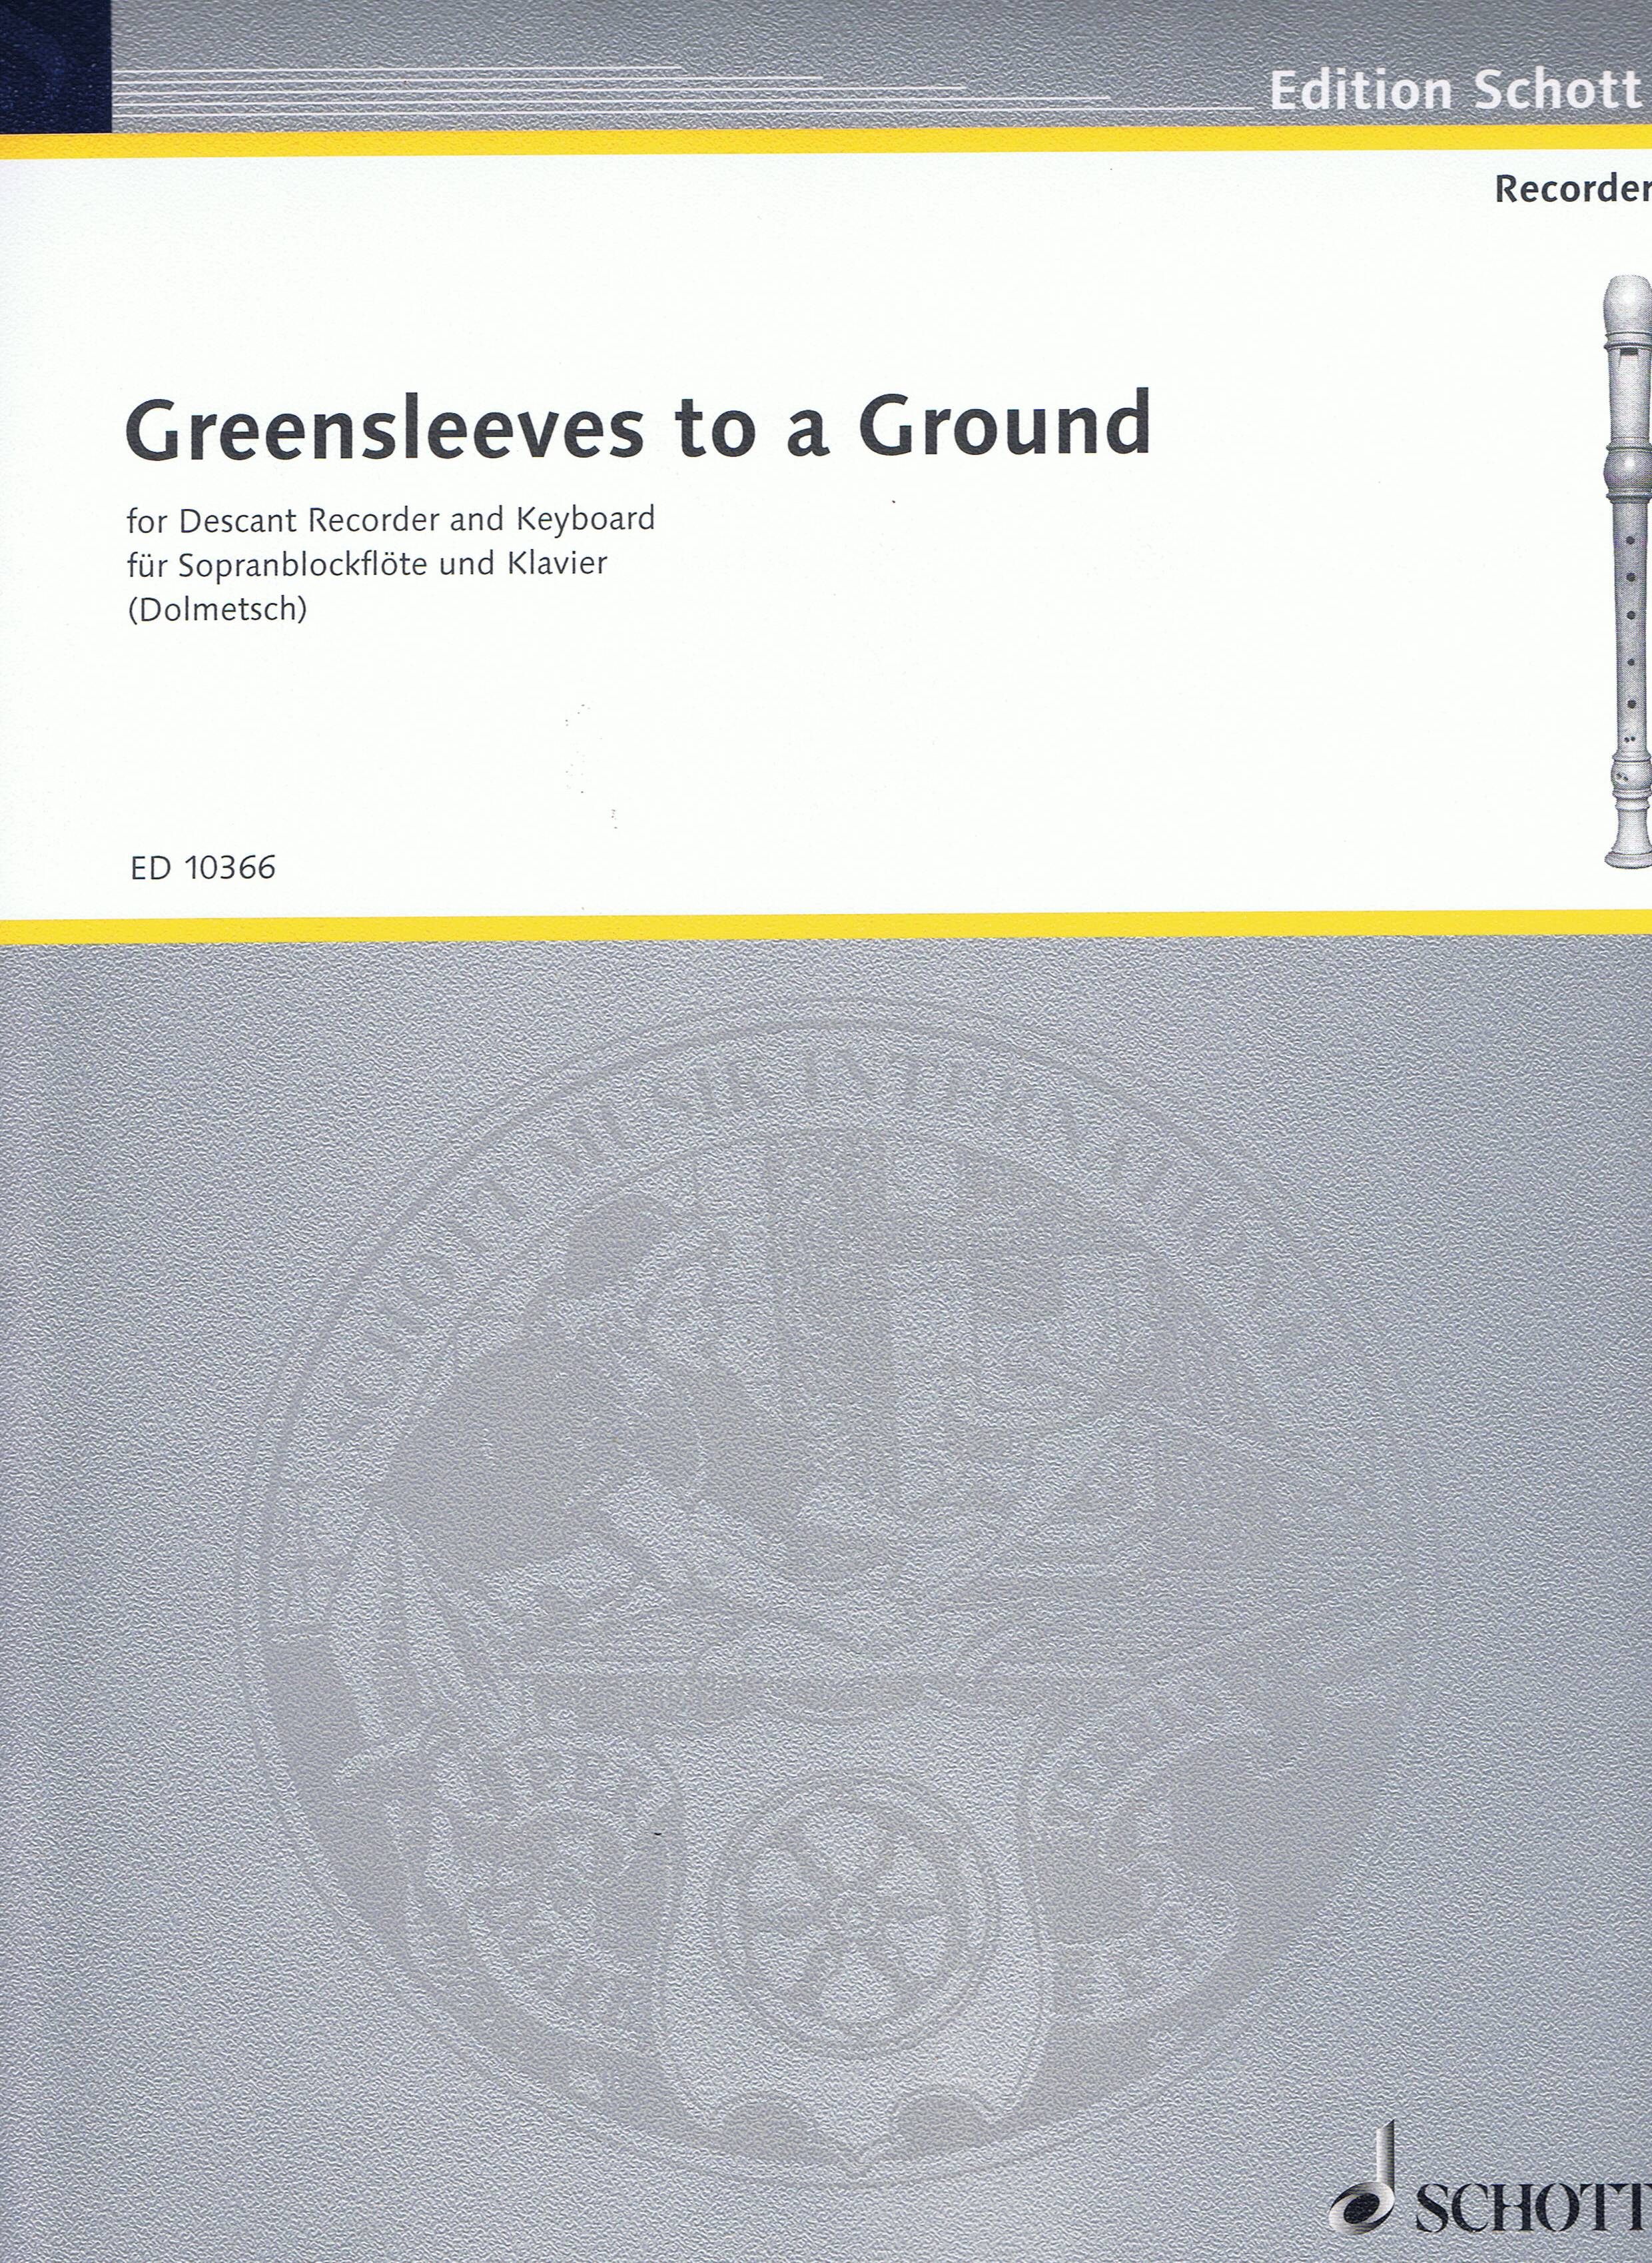 Arnold Dolmetsch: Greensleeves To Ground: Descant Recorder: Score and Parts